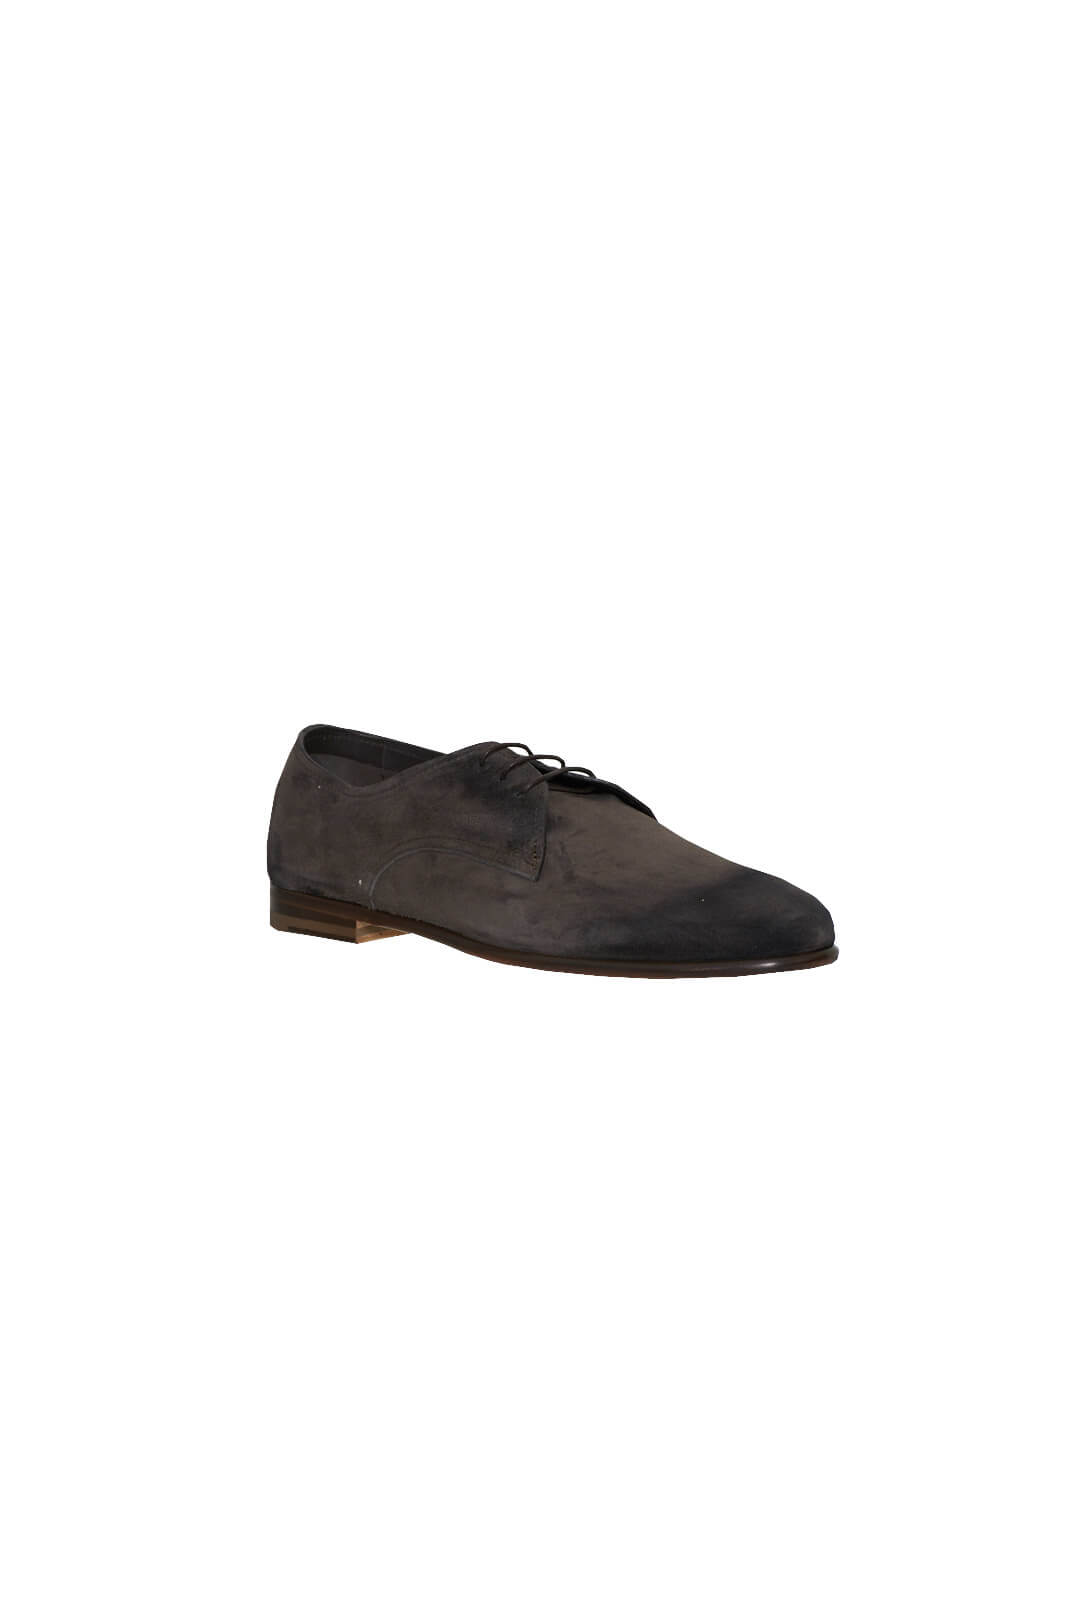 Fabi men's lace-up shoes in suede